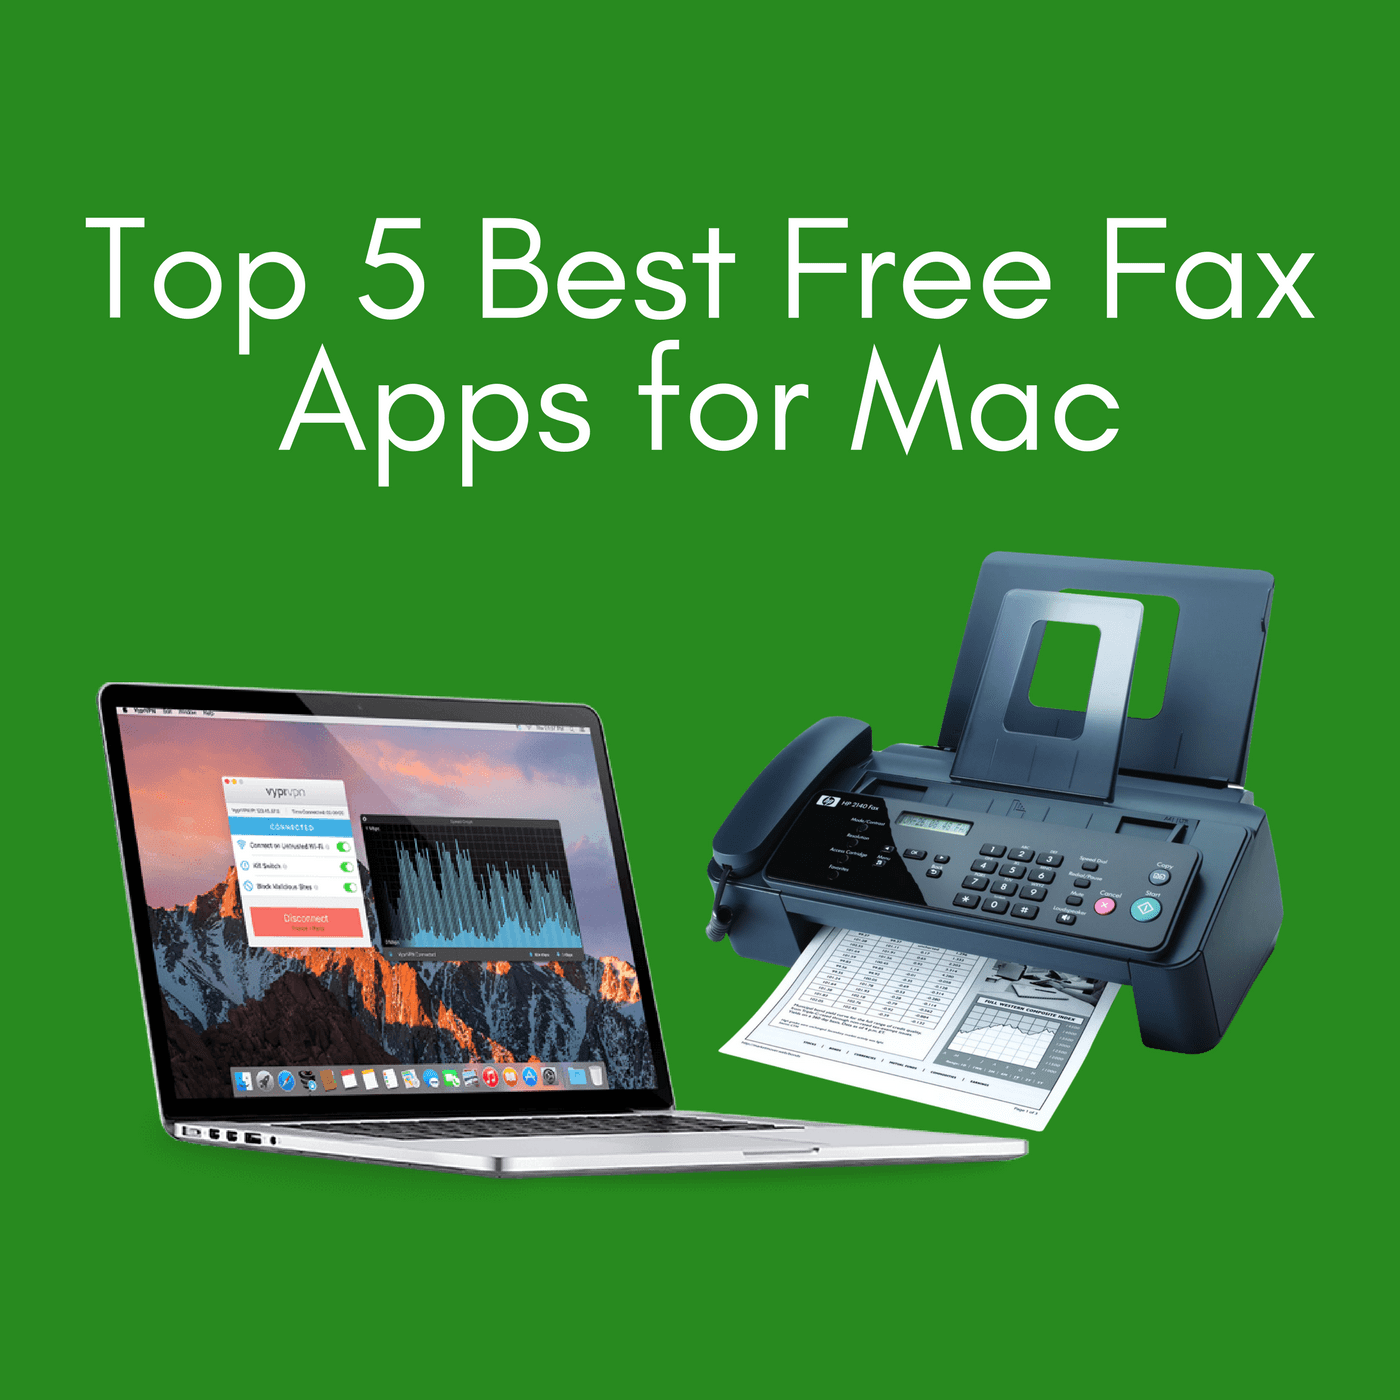 email a fax on my mac for free